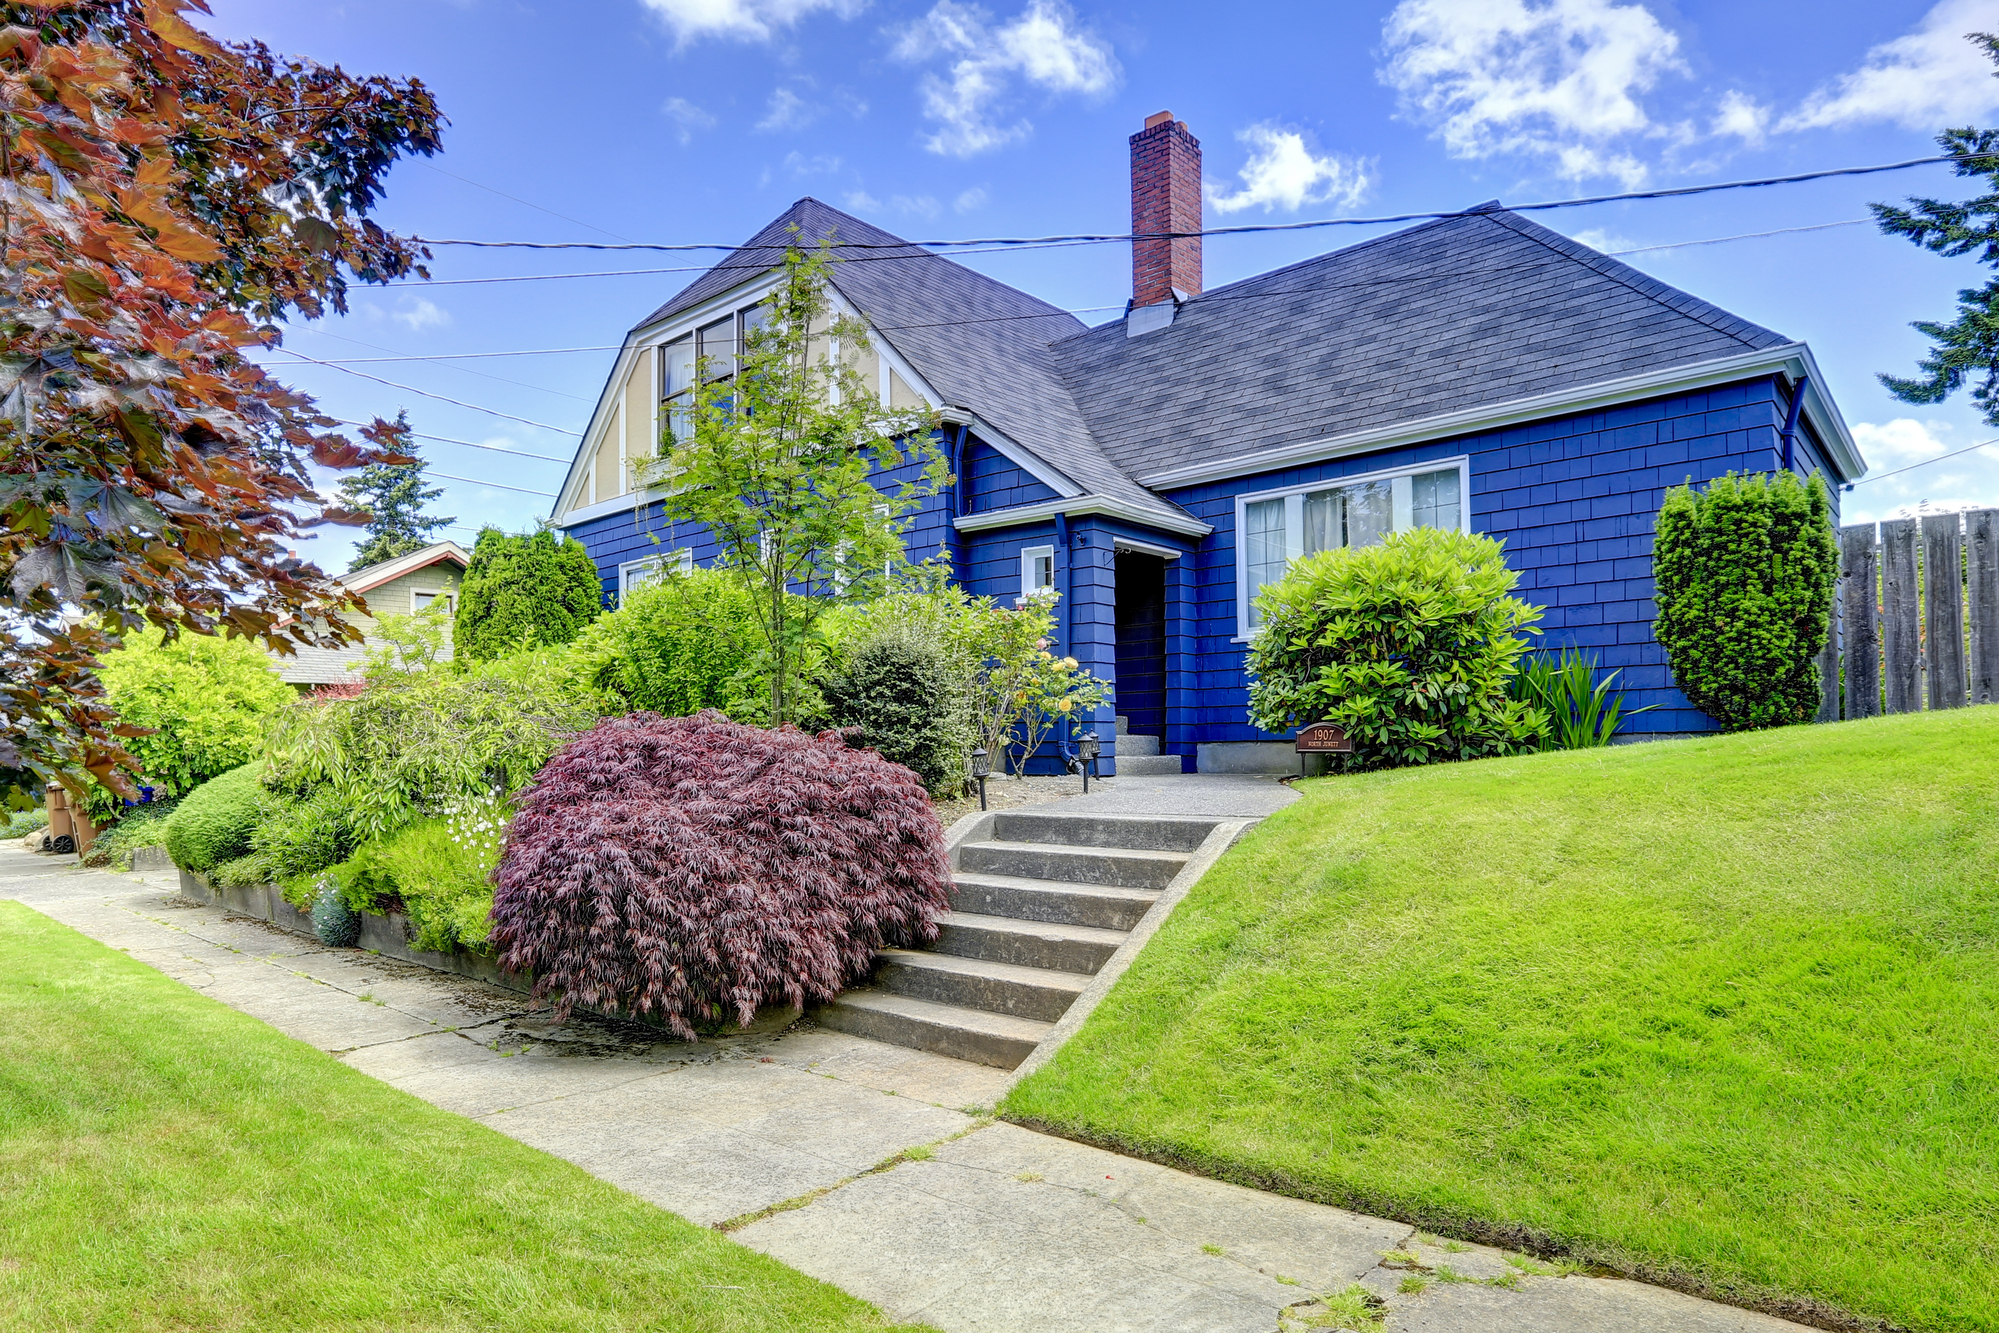 12 Things Ruining Your Home’s Curb Appeal And Annoying Your Neighbors